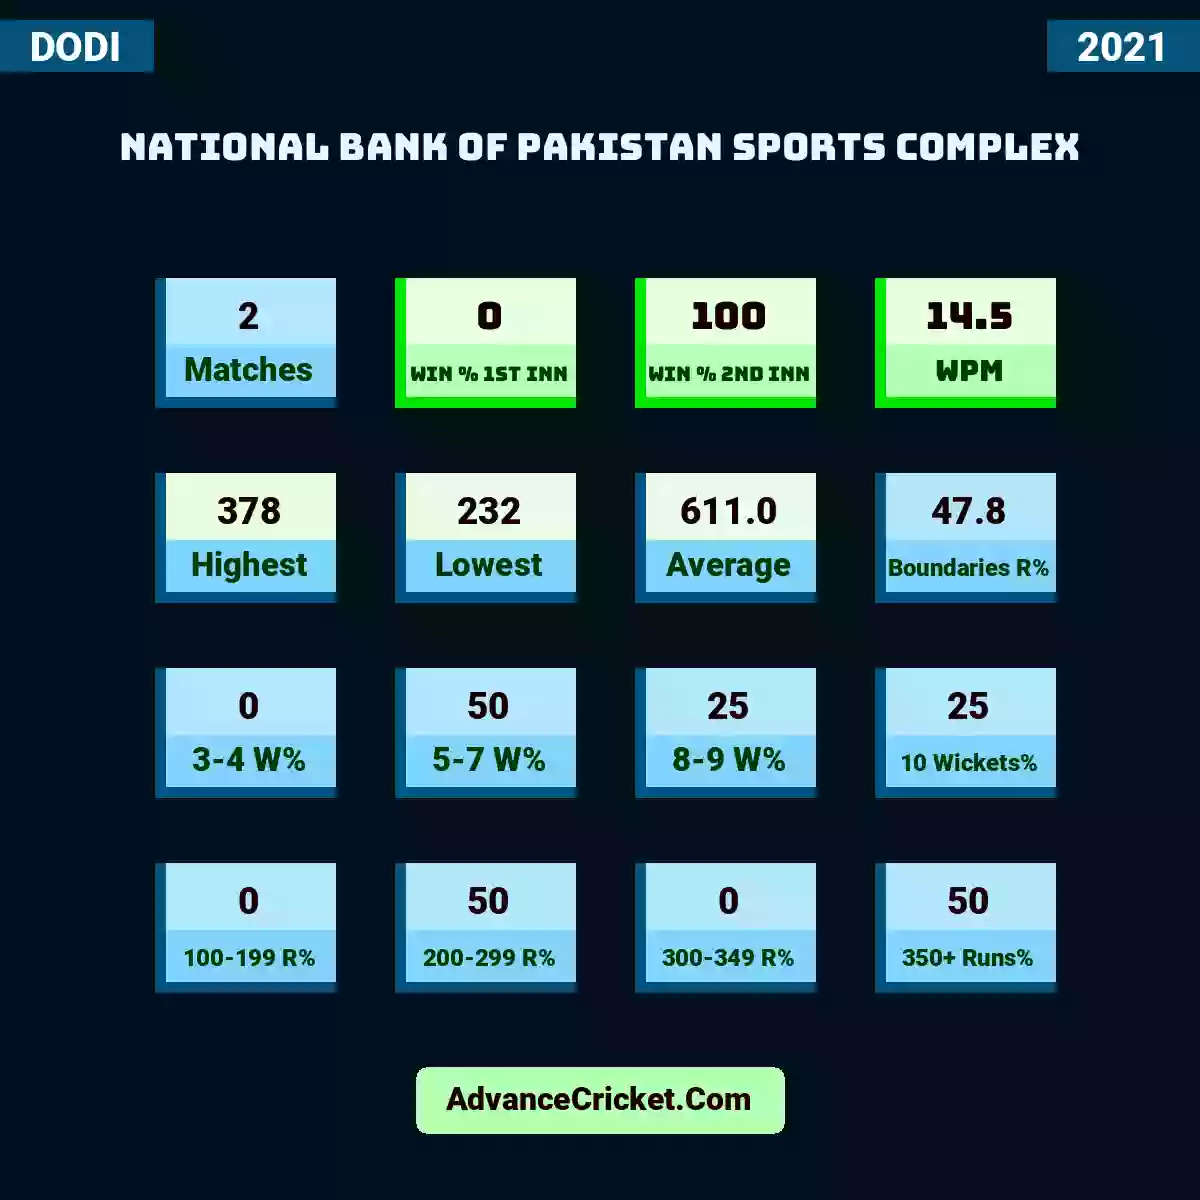 Image showing National Bank of Pakistan Sports Complex with Matches: 2, Win % 1st Inn: 0, Win % 2nd Inn: 100, WPM: 14.5, Highest: 378, Lowest: 232, Average: 611.0, Boundaries R%: 47.8, 3-4 W%: 0, 5-7 W%: 50, 8-9 W%: 25, 10 Wickets%: 25, 100-199 R%: 0, 200-299 R%: 50, 300-349 R%: 0, 350+ Runs%: 50.